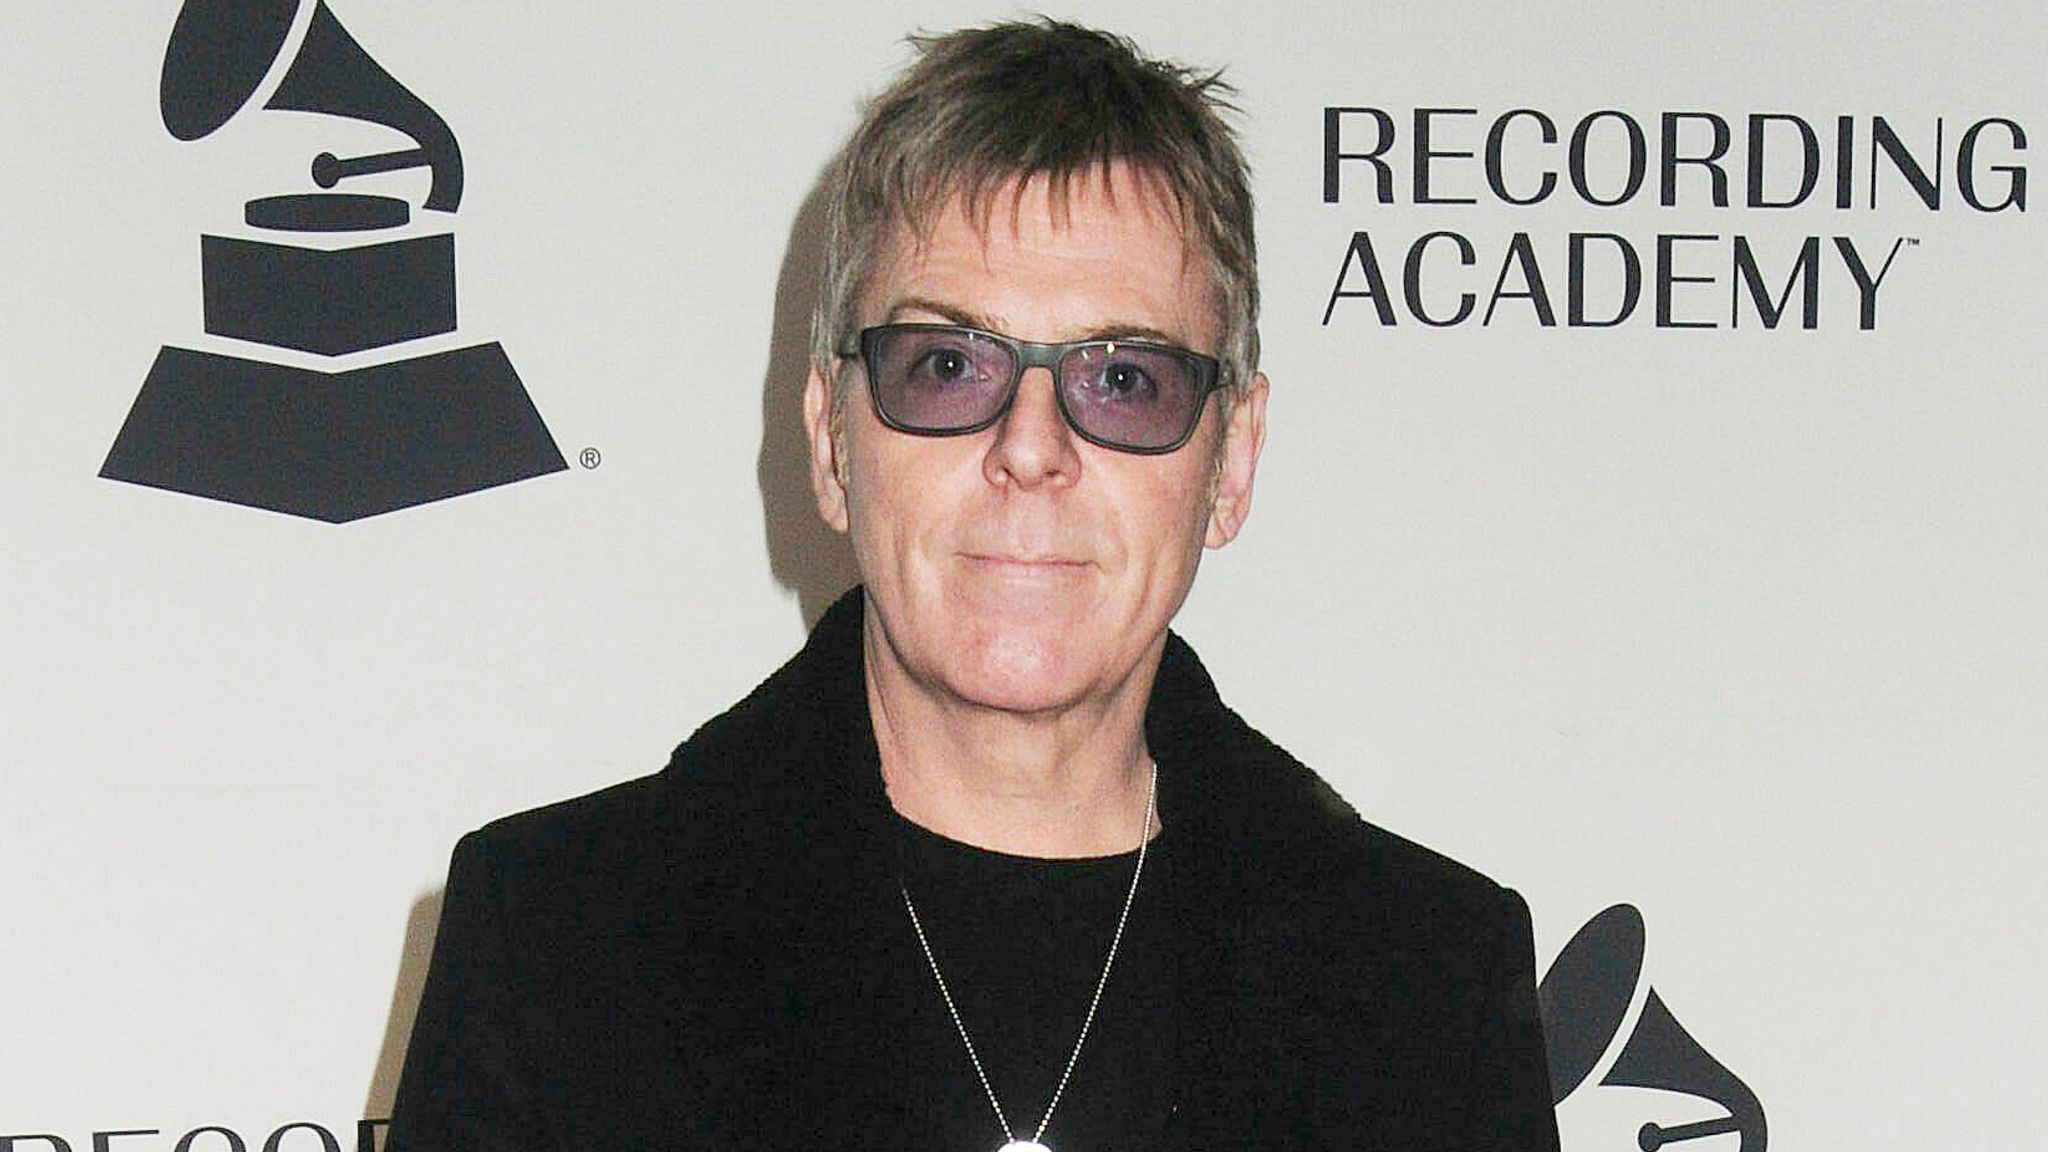 ‘The Smiths’ Bassist Andy Rourke Dies at 59, Cause of Death Explored